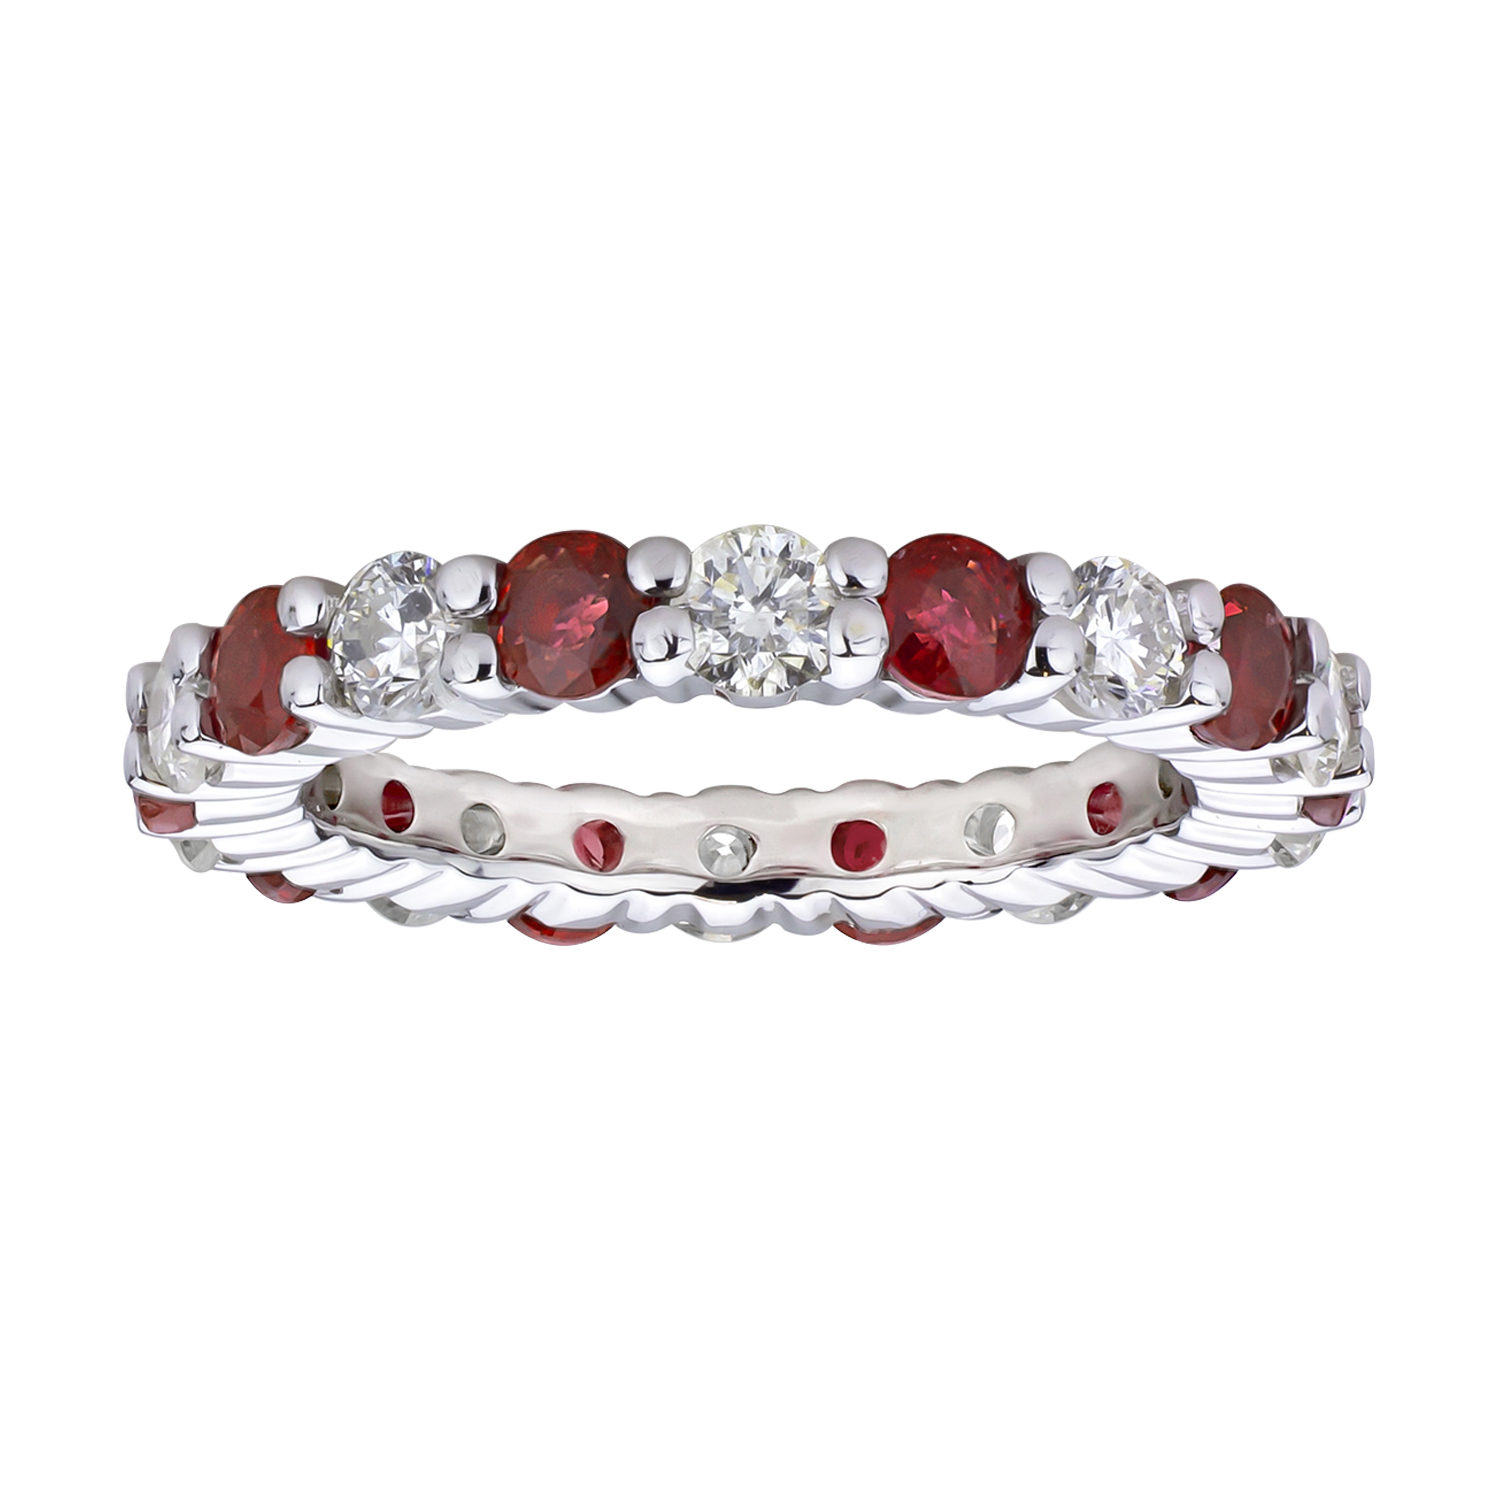 2.20cttw Diamond and Natural Heated Ruby Eternity Band set in 14k Gold